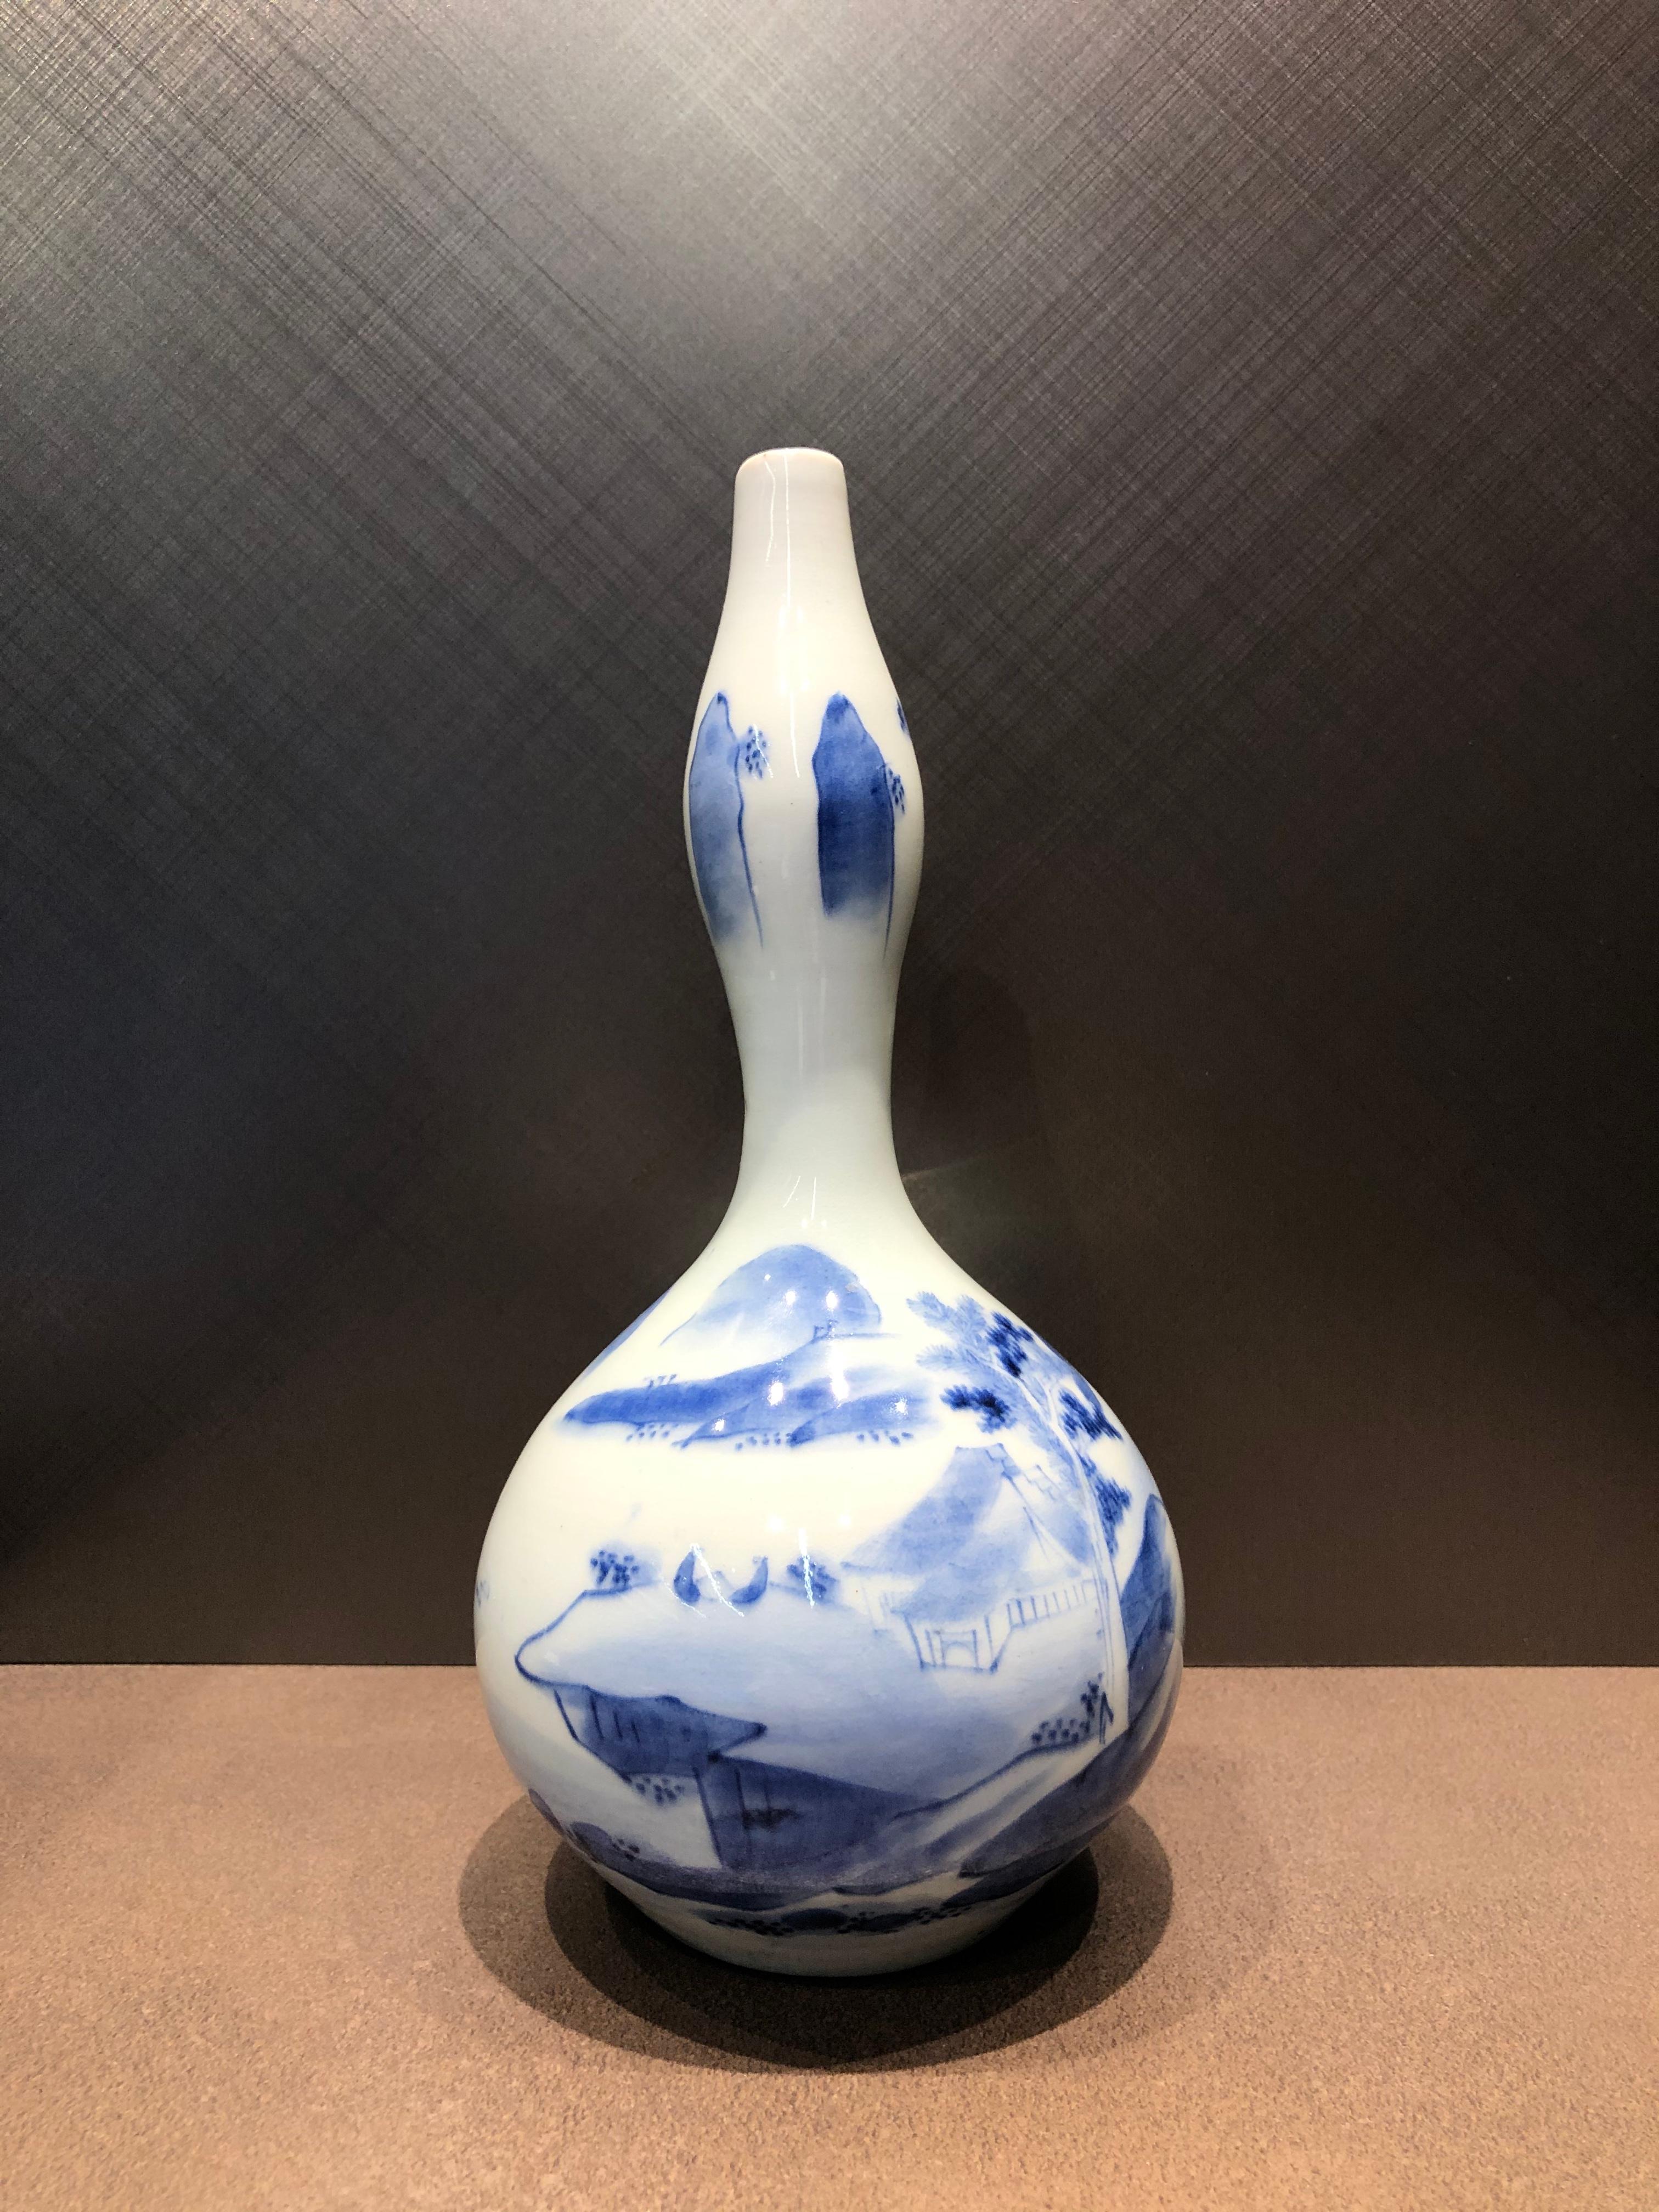 Imari ware made in the Arita area during the Edo period.

Gourd-shaped with a slender neck and mouth, it has a graceful appearance.
The style is reminiscent of Chinese Ming Dynasty paintings, with landscapes, houses, trees, and figures.